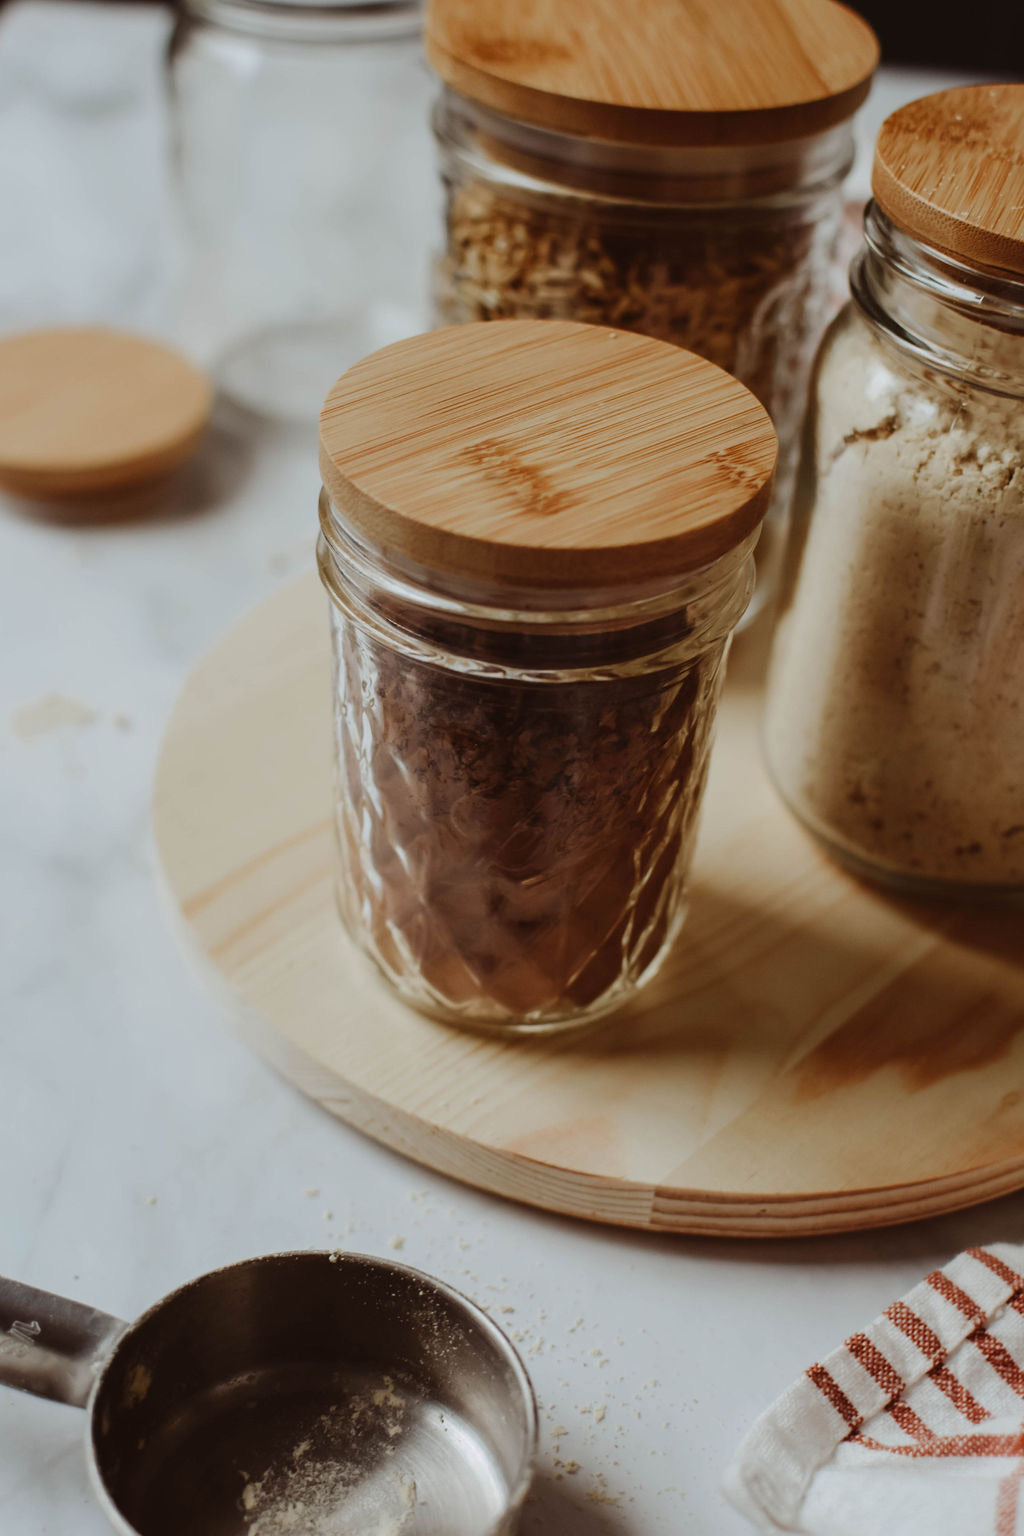 Glass Jars with Bamboo Lids – Pepper + Vetiver